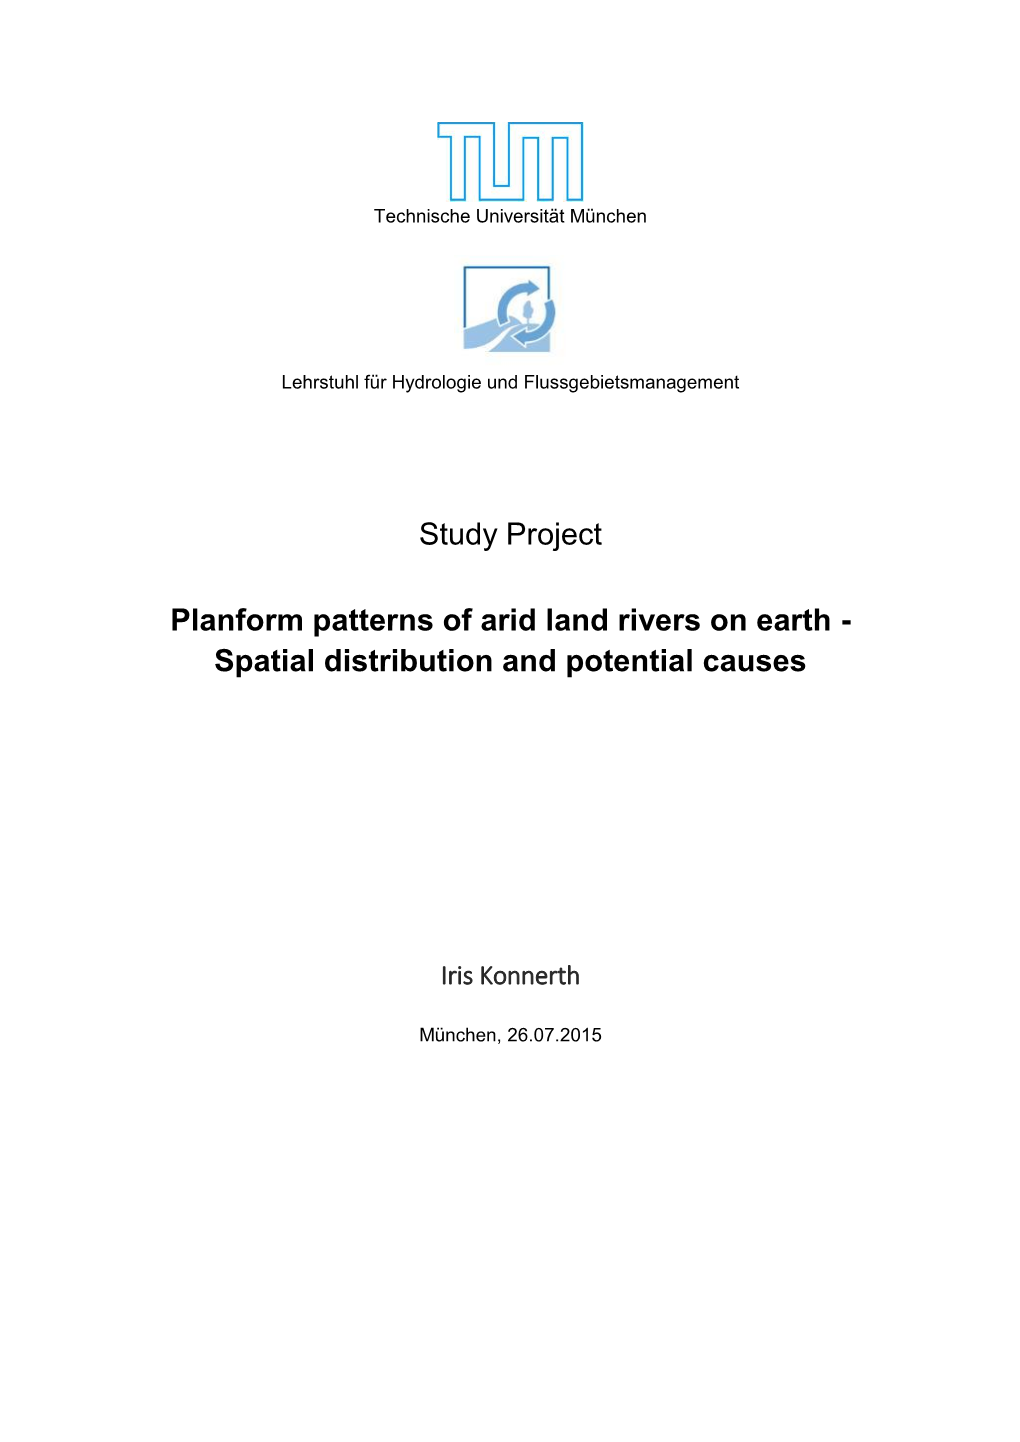 Study Project Planform Patterns of Arid Land Rivers on Earth